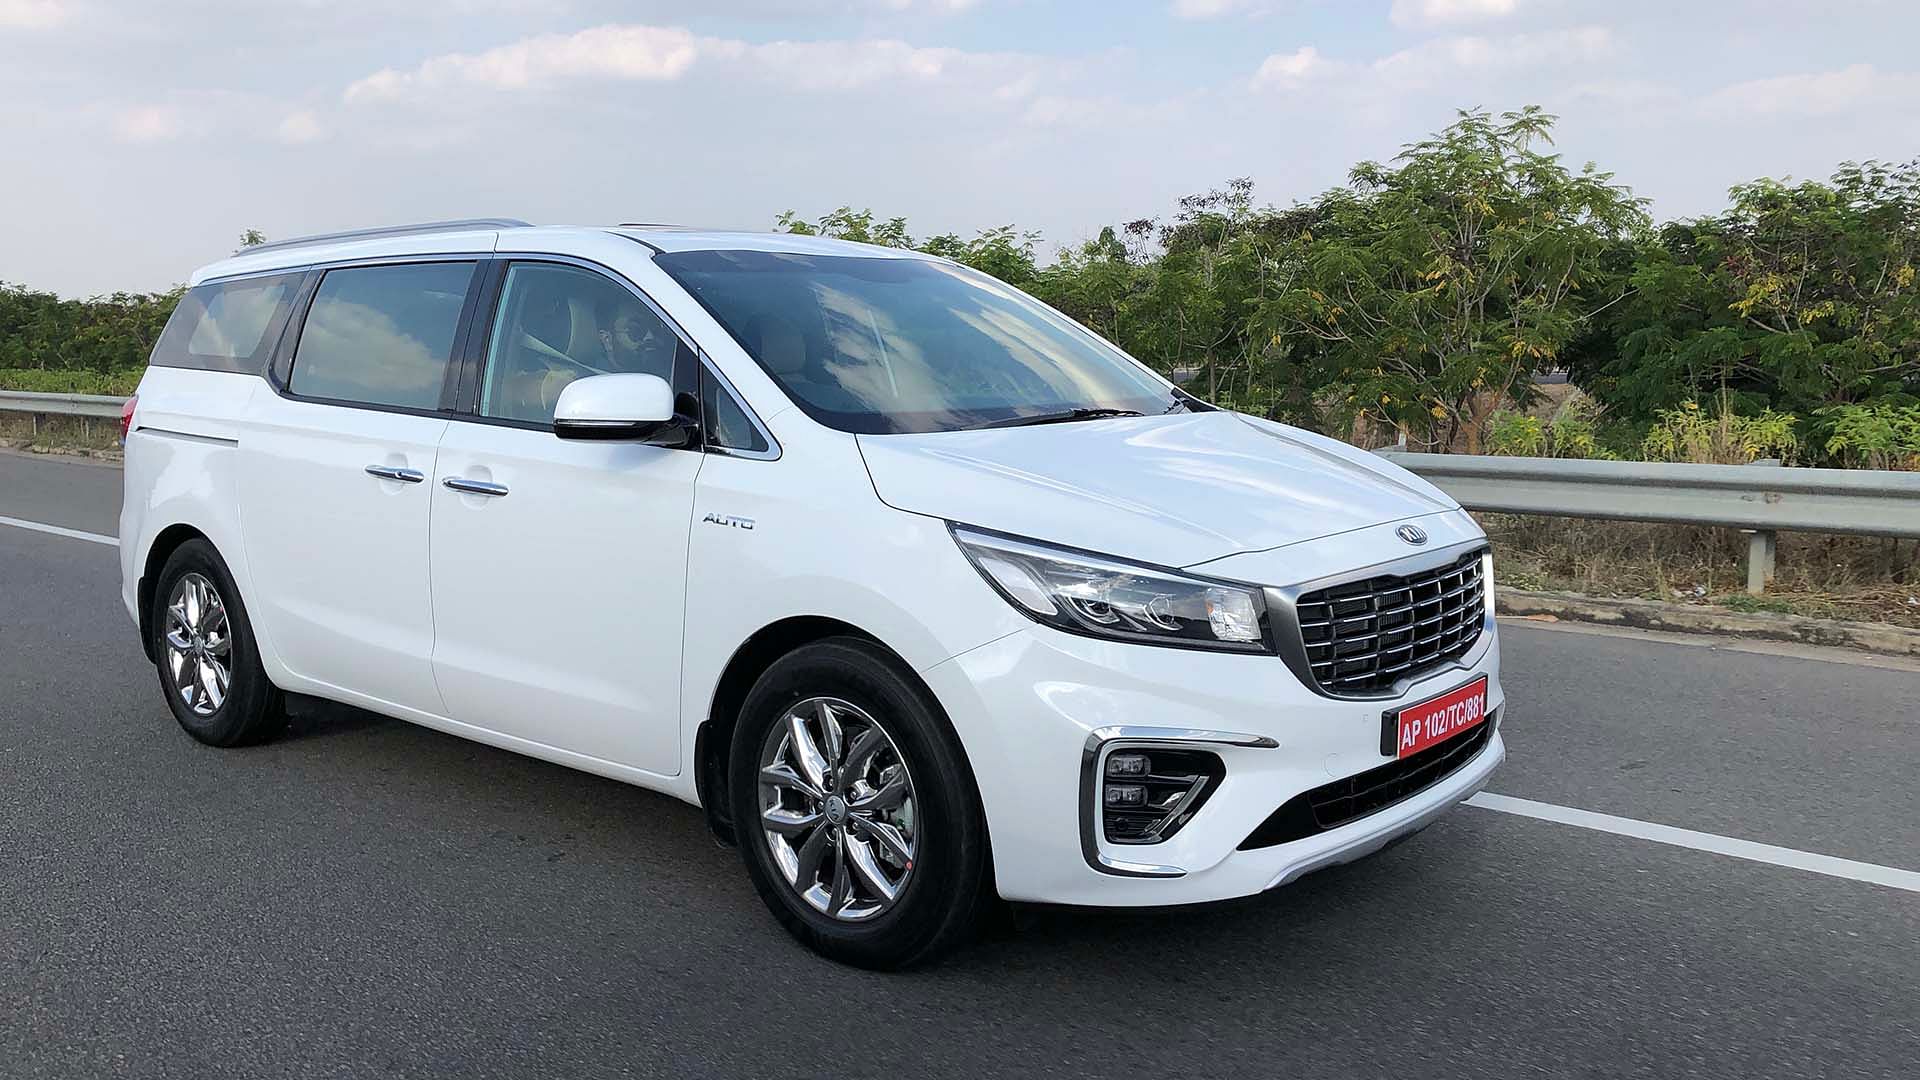 The Kia Carnival measures 5,115 mm in length with a wheelbase of 3,060 mm.&nbsp;